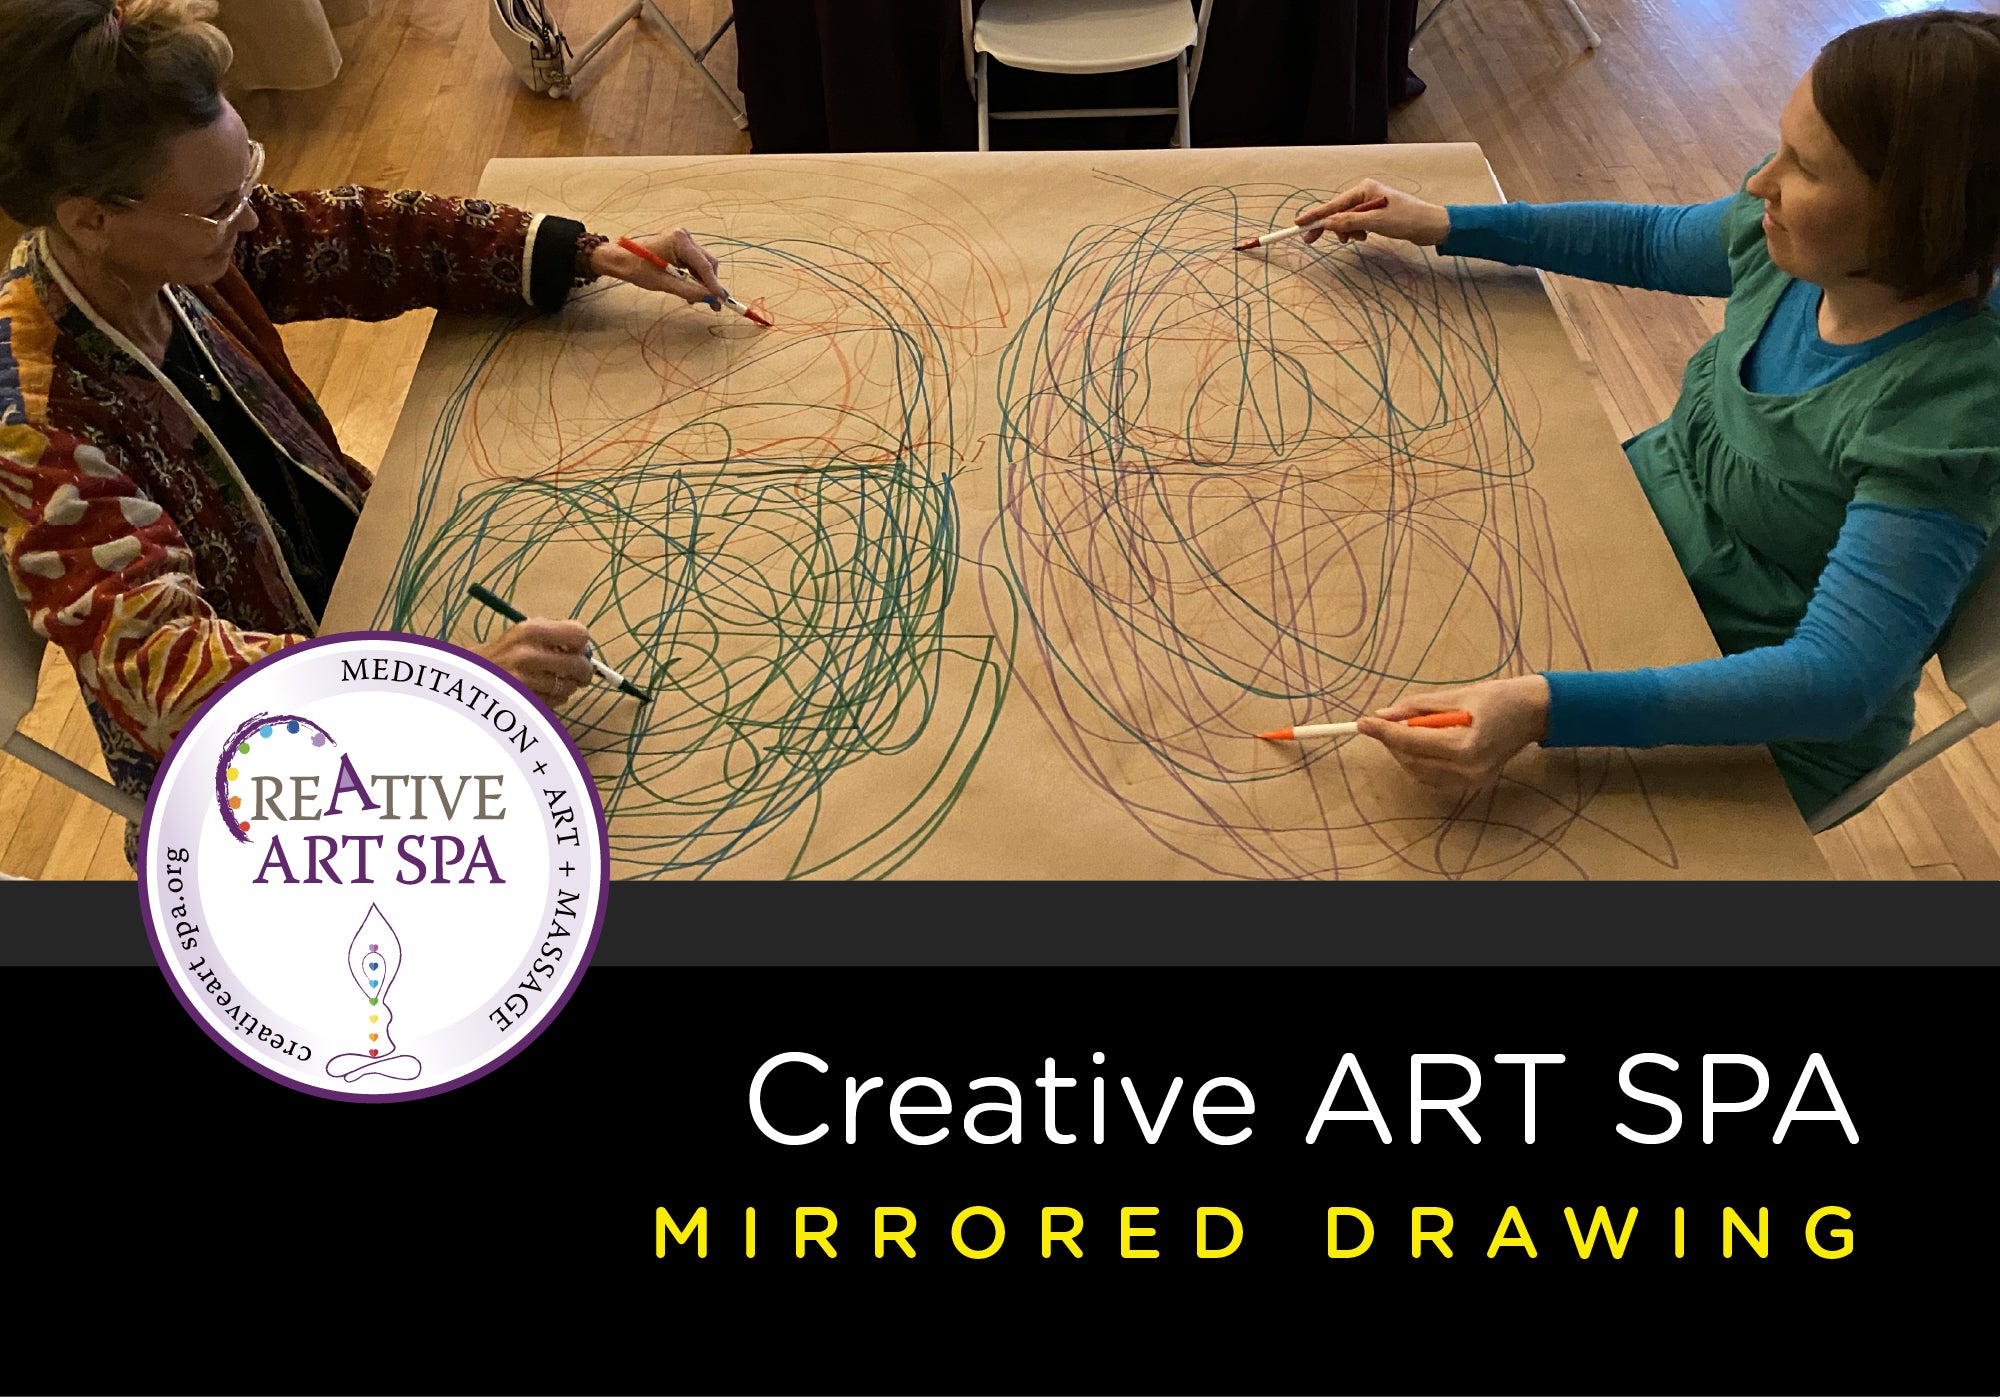 ART SPA: Mirrored Drawing October 14th 6-8 PM